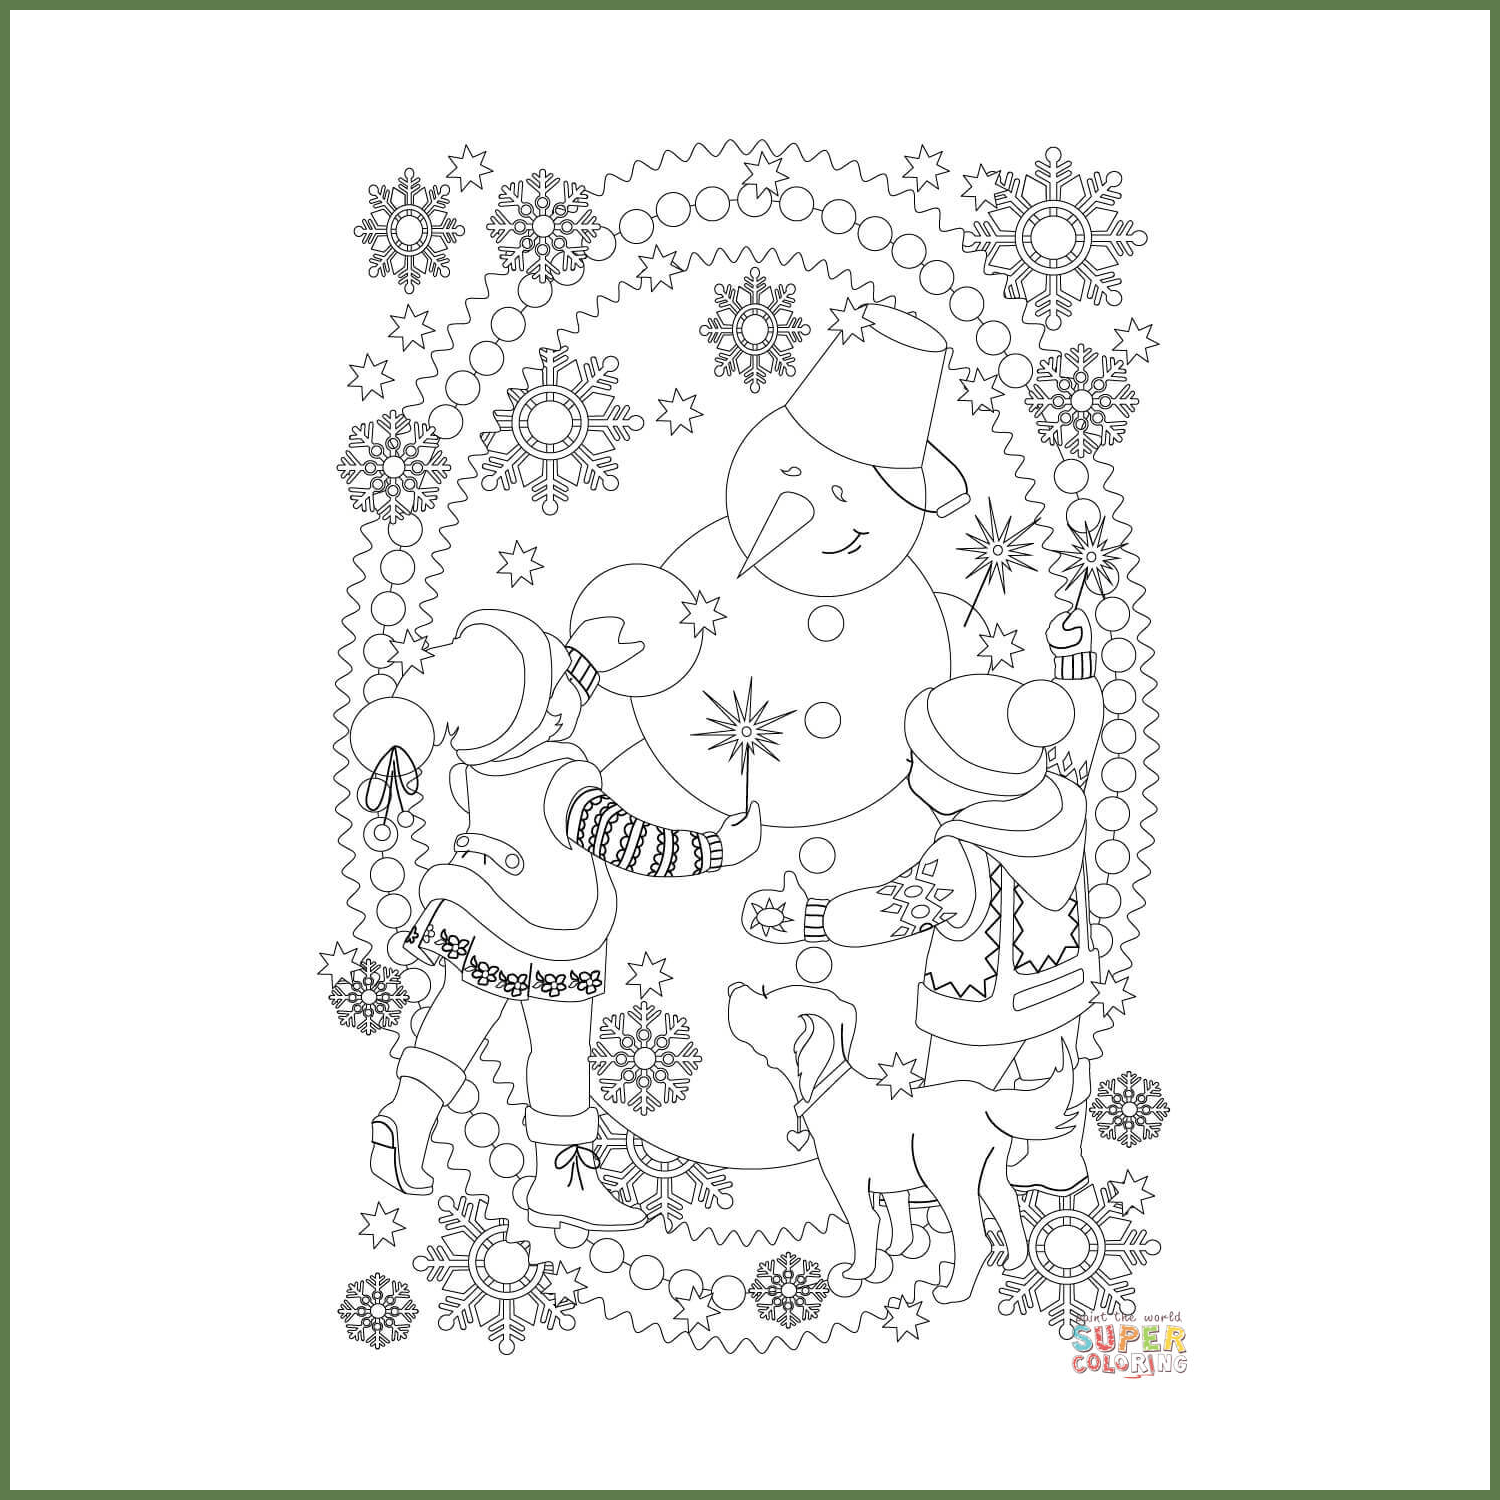 A Girl, a Boy, a Dog, and a Snowman are Playing Together coloring page cover image.